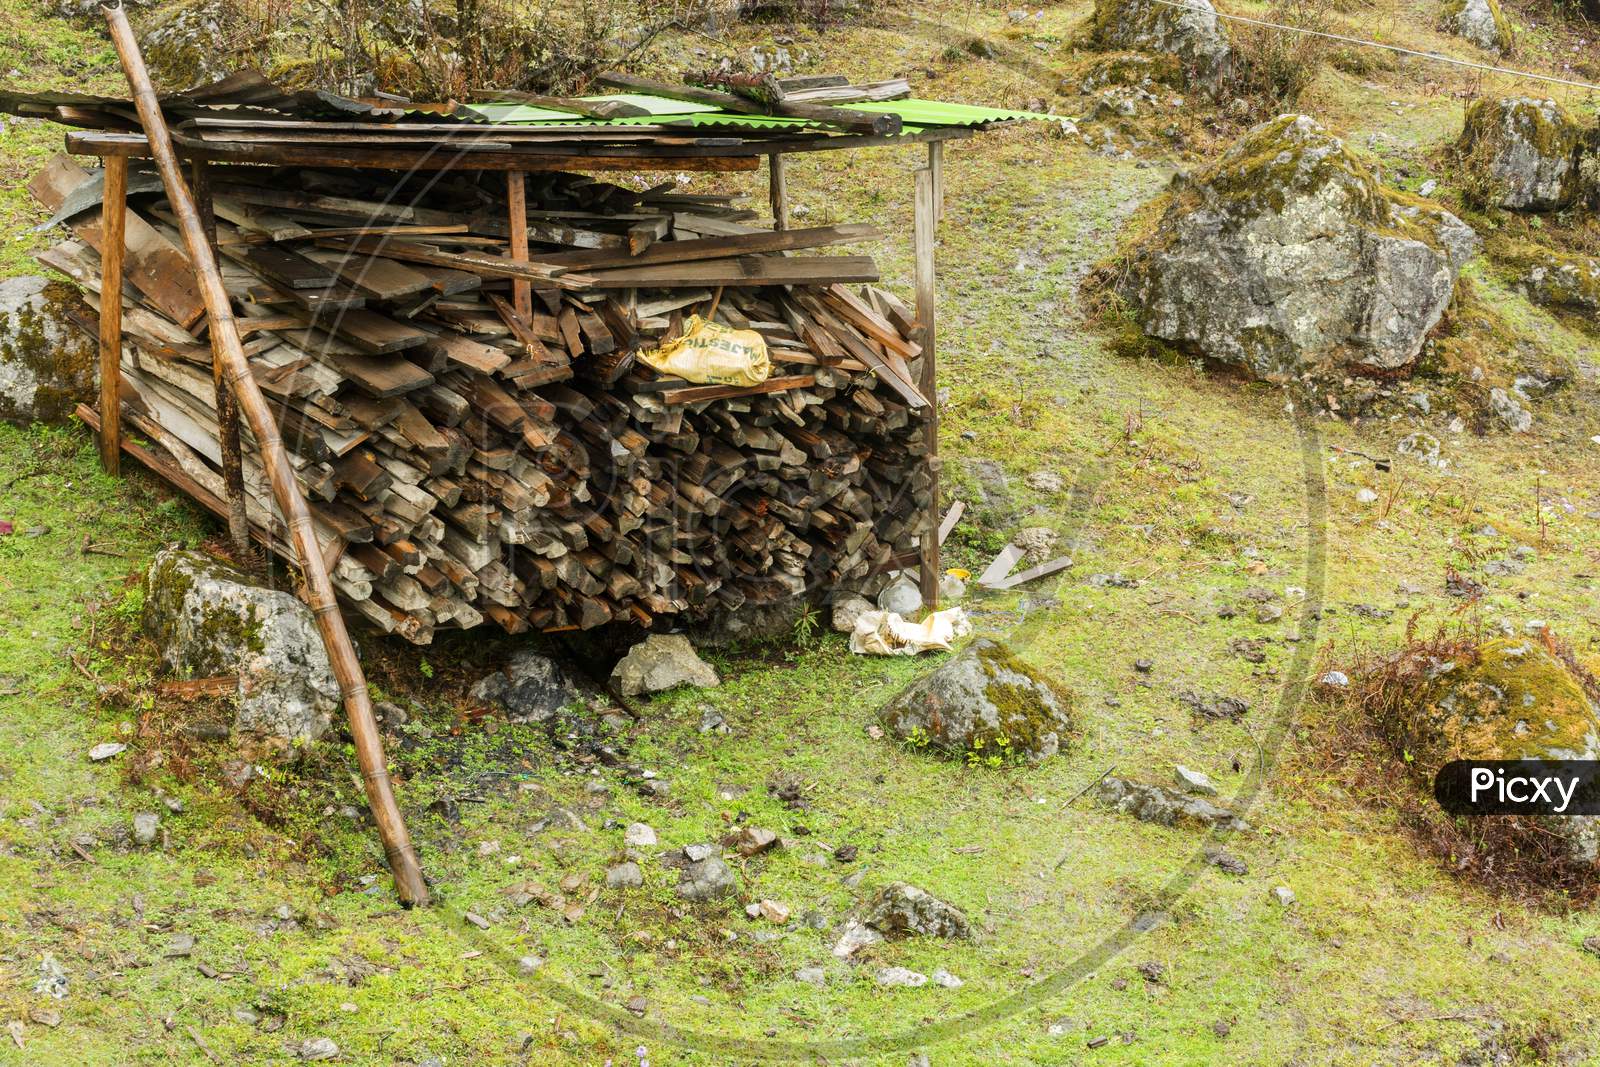 An Wooden Shade To Store Woods With Green Meadow In Background At Lachung Village Of North Sikkim.